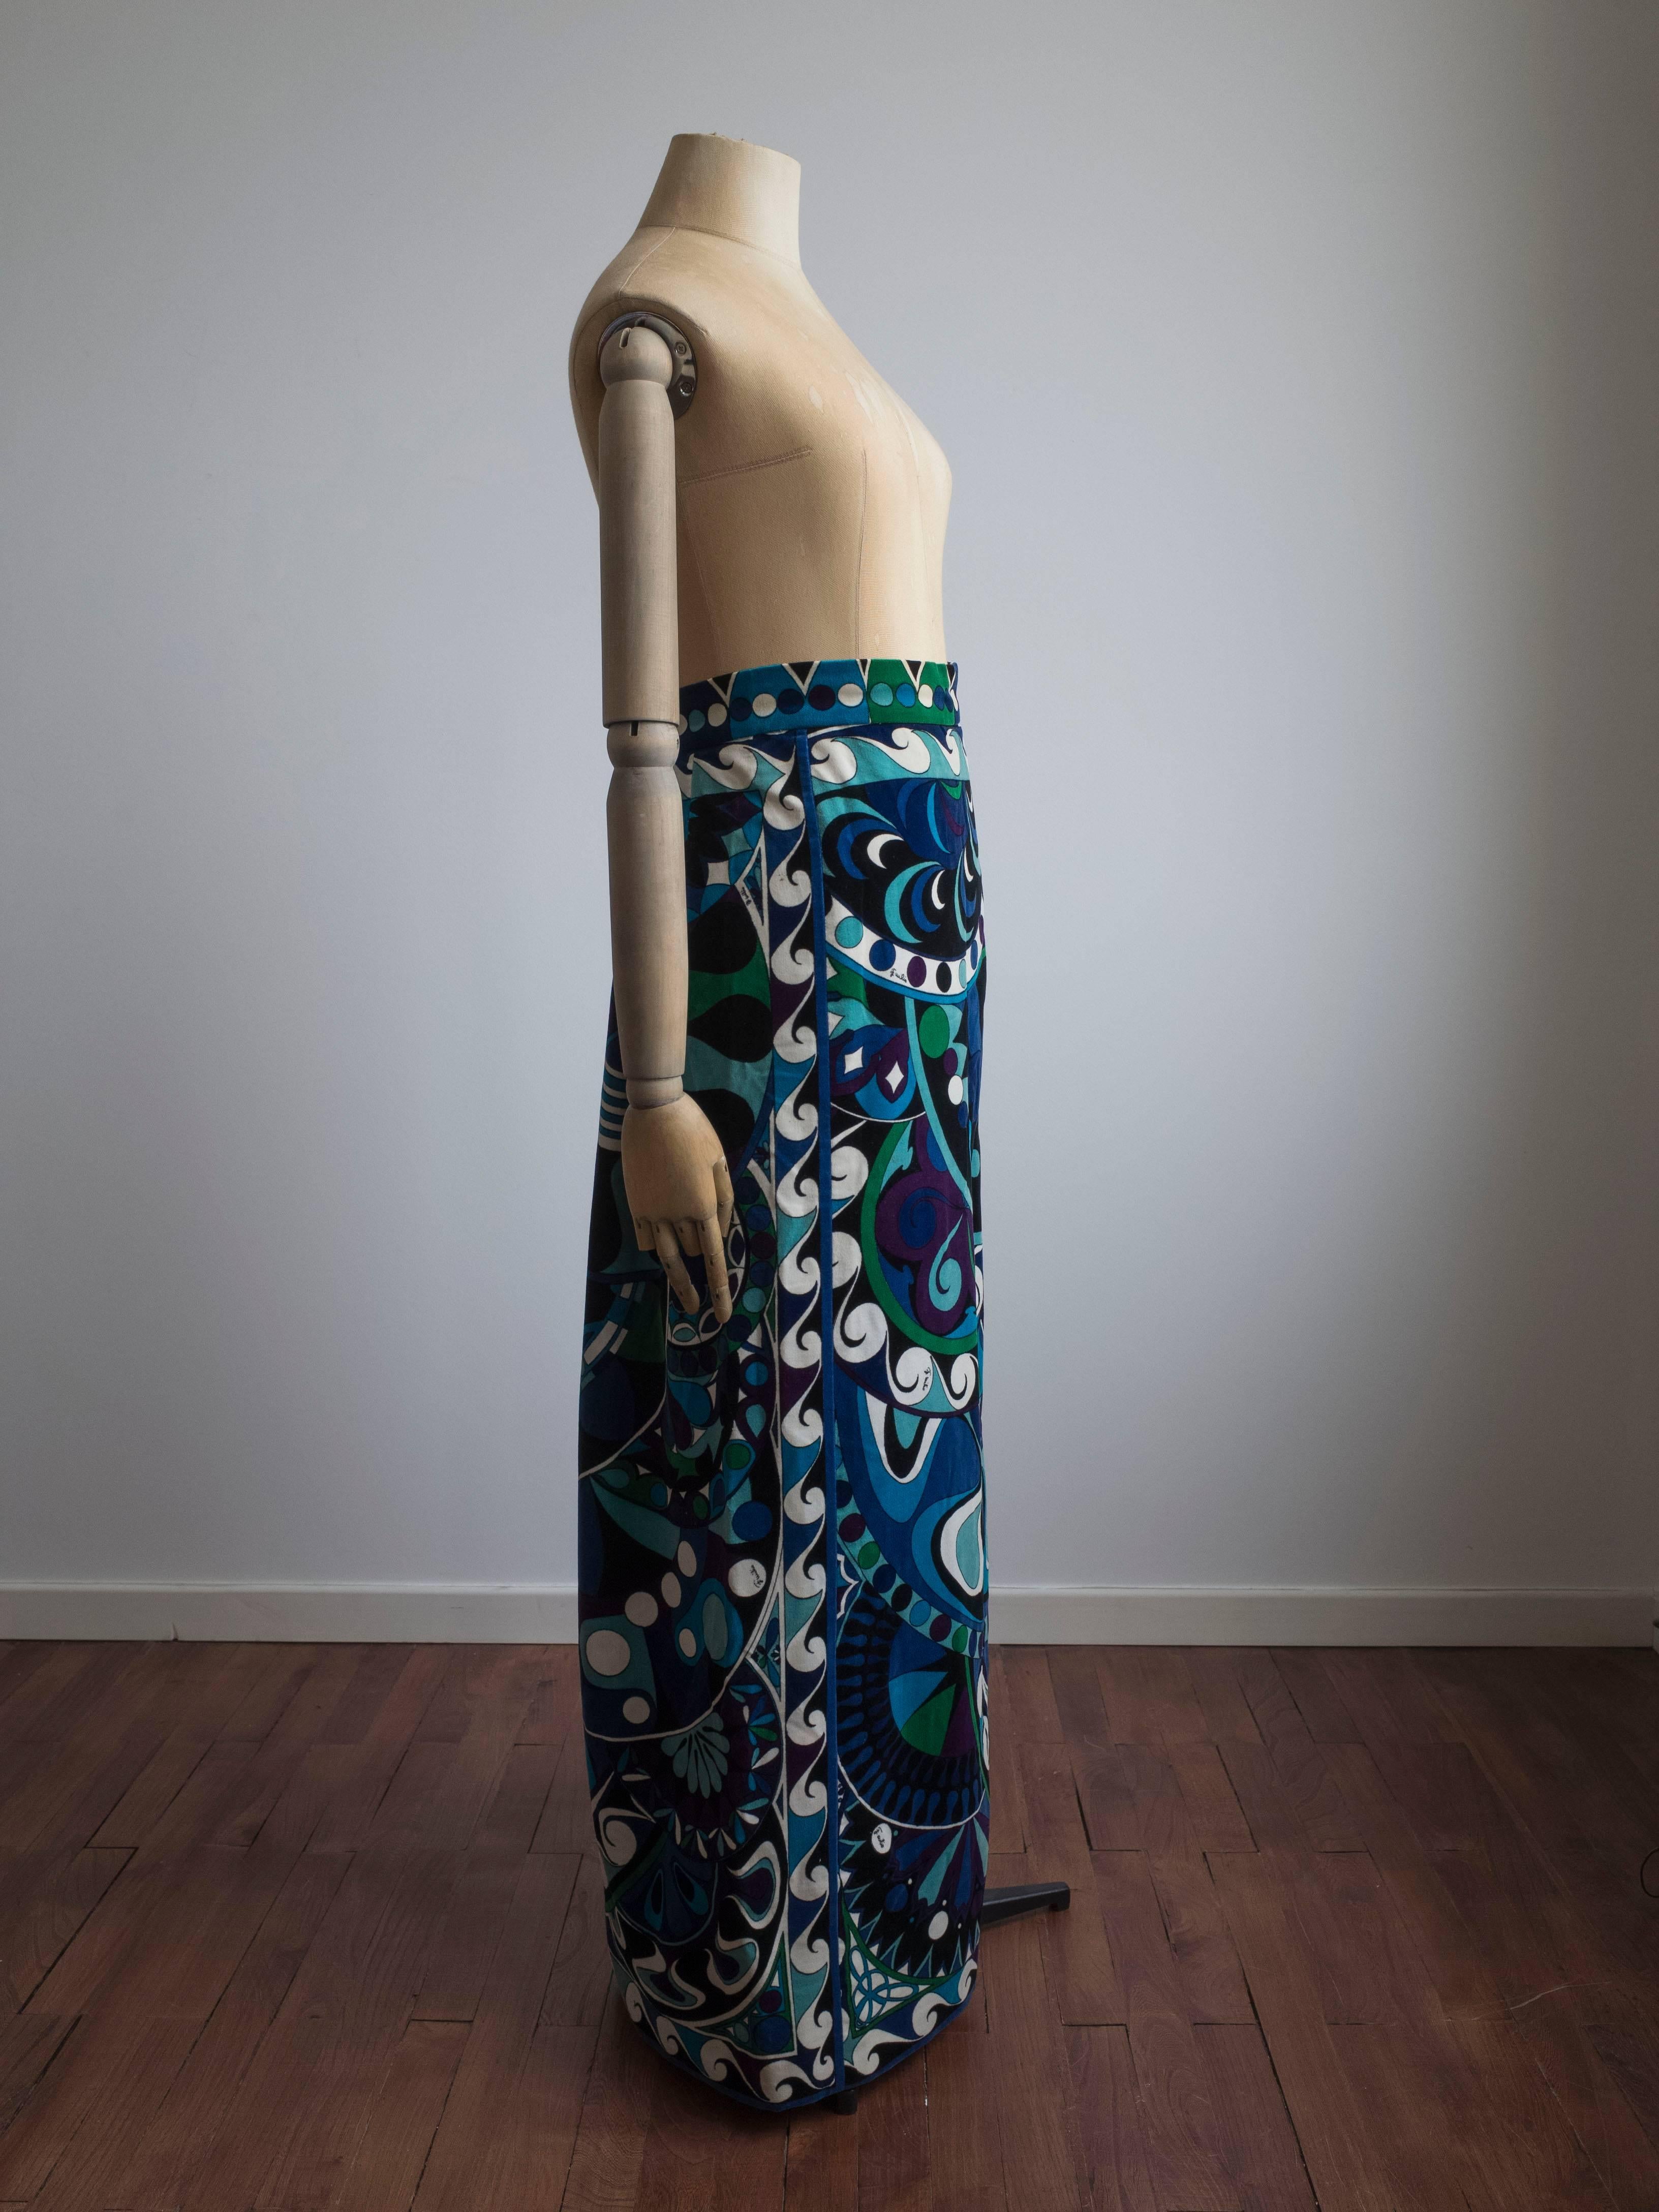 1960s Emilio Pucci column skirt in velvet. Groovy abstract print with signature logo throughout.
Features a 2 inch fitted waistband with flat front and two pleats at the back waist. Fully lined.
Outer: 100% Cotton,Lining: Synthetic
Size as marked: